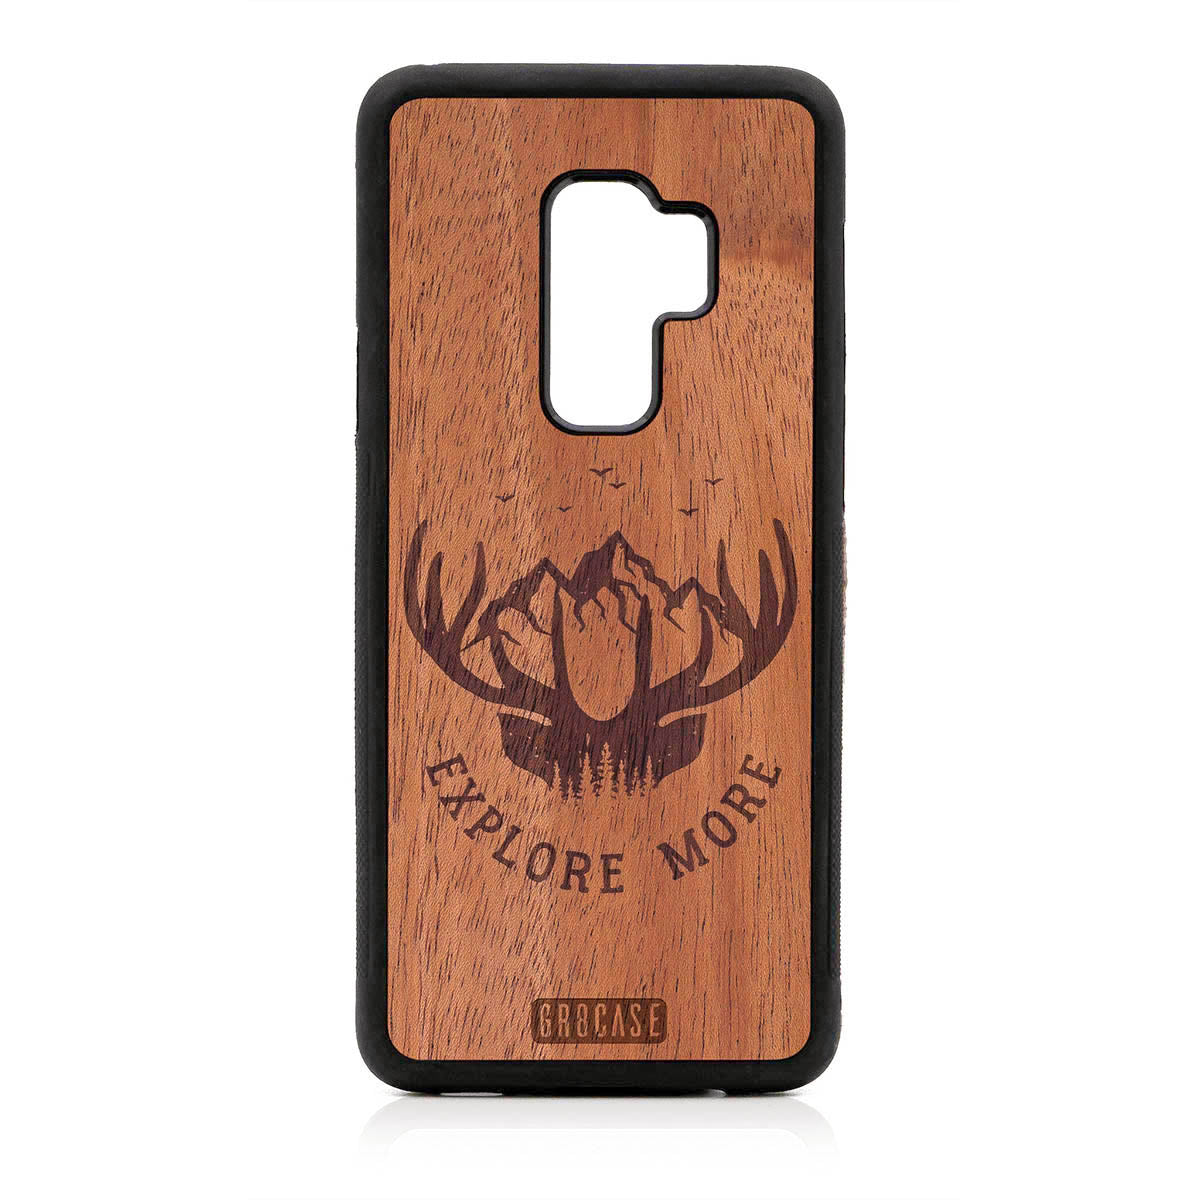 Explore More (Forest, Mountains & Antlers) Design Wood Case For Samsung Galaxy S9 Plus by GR8CASE